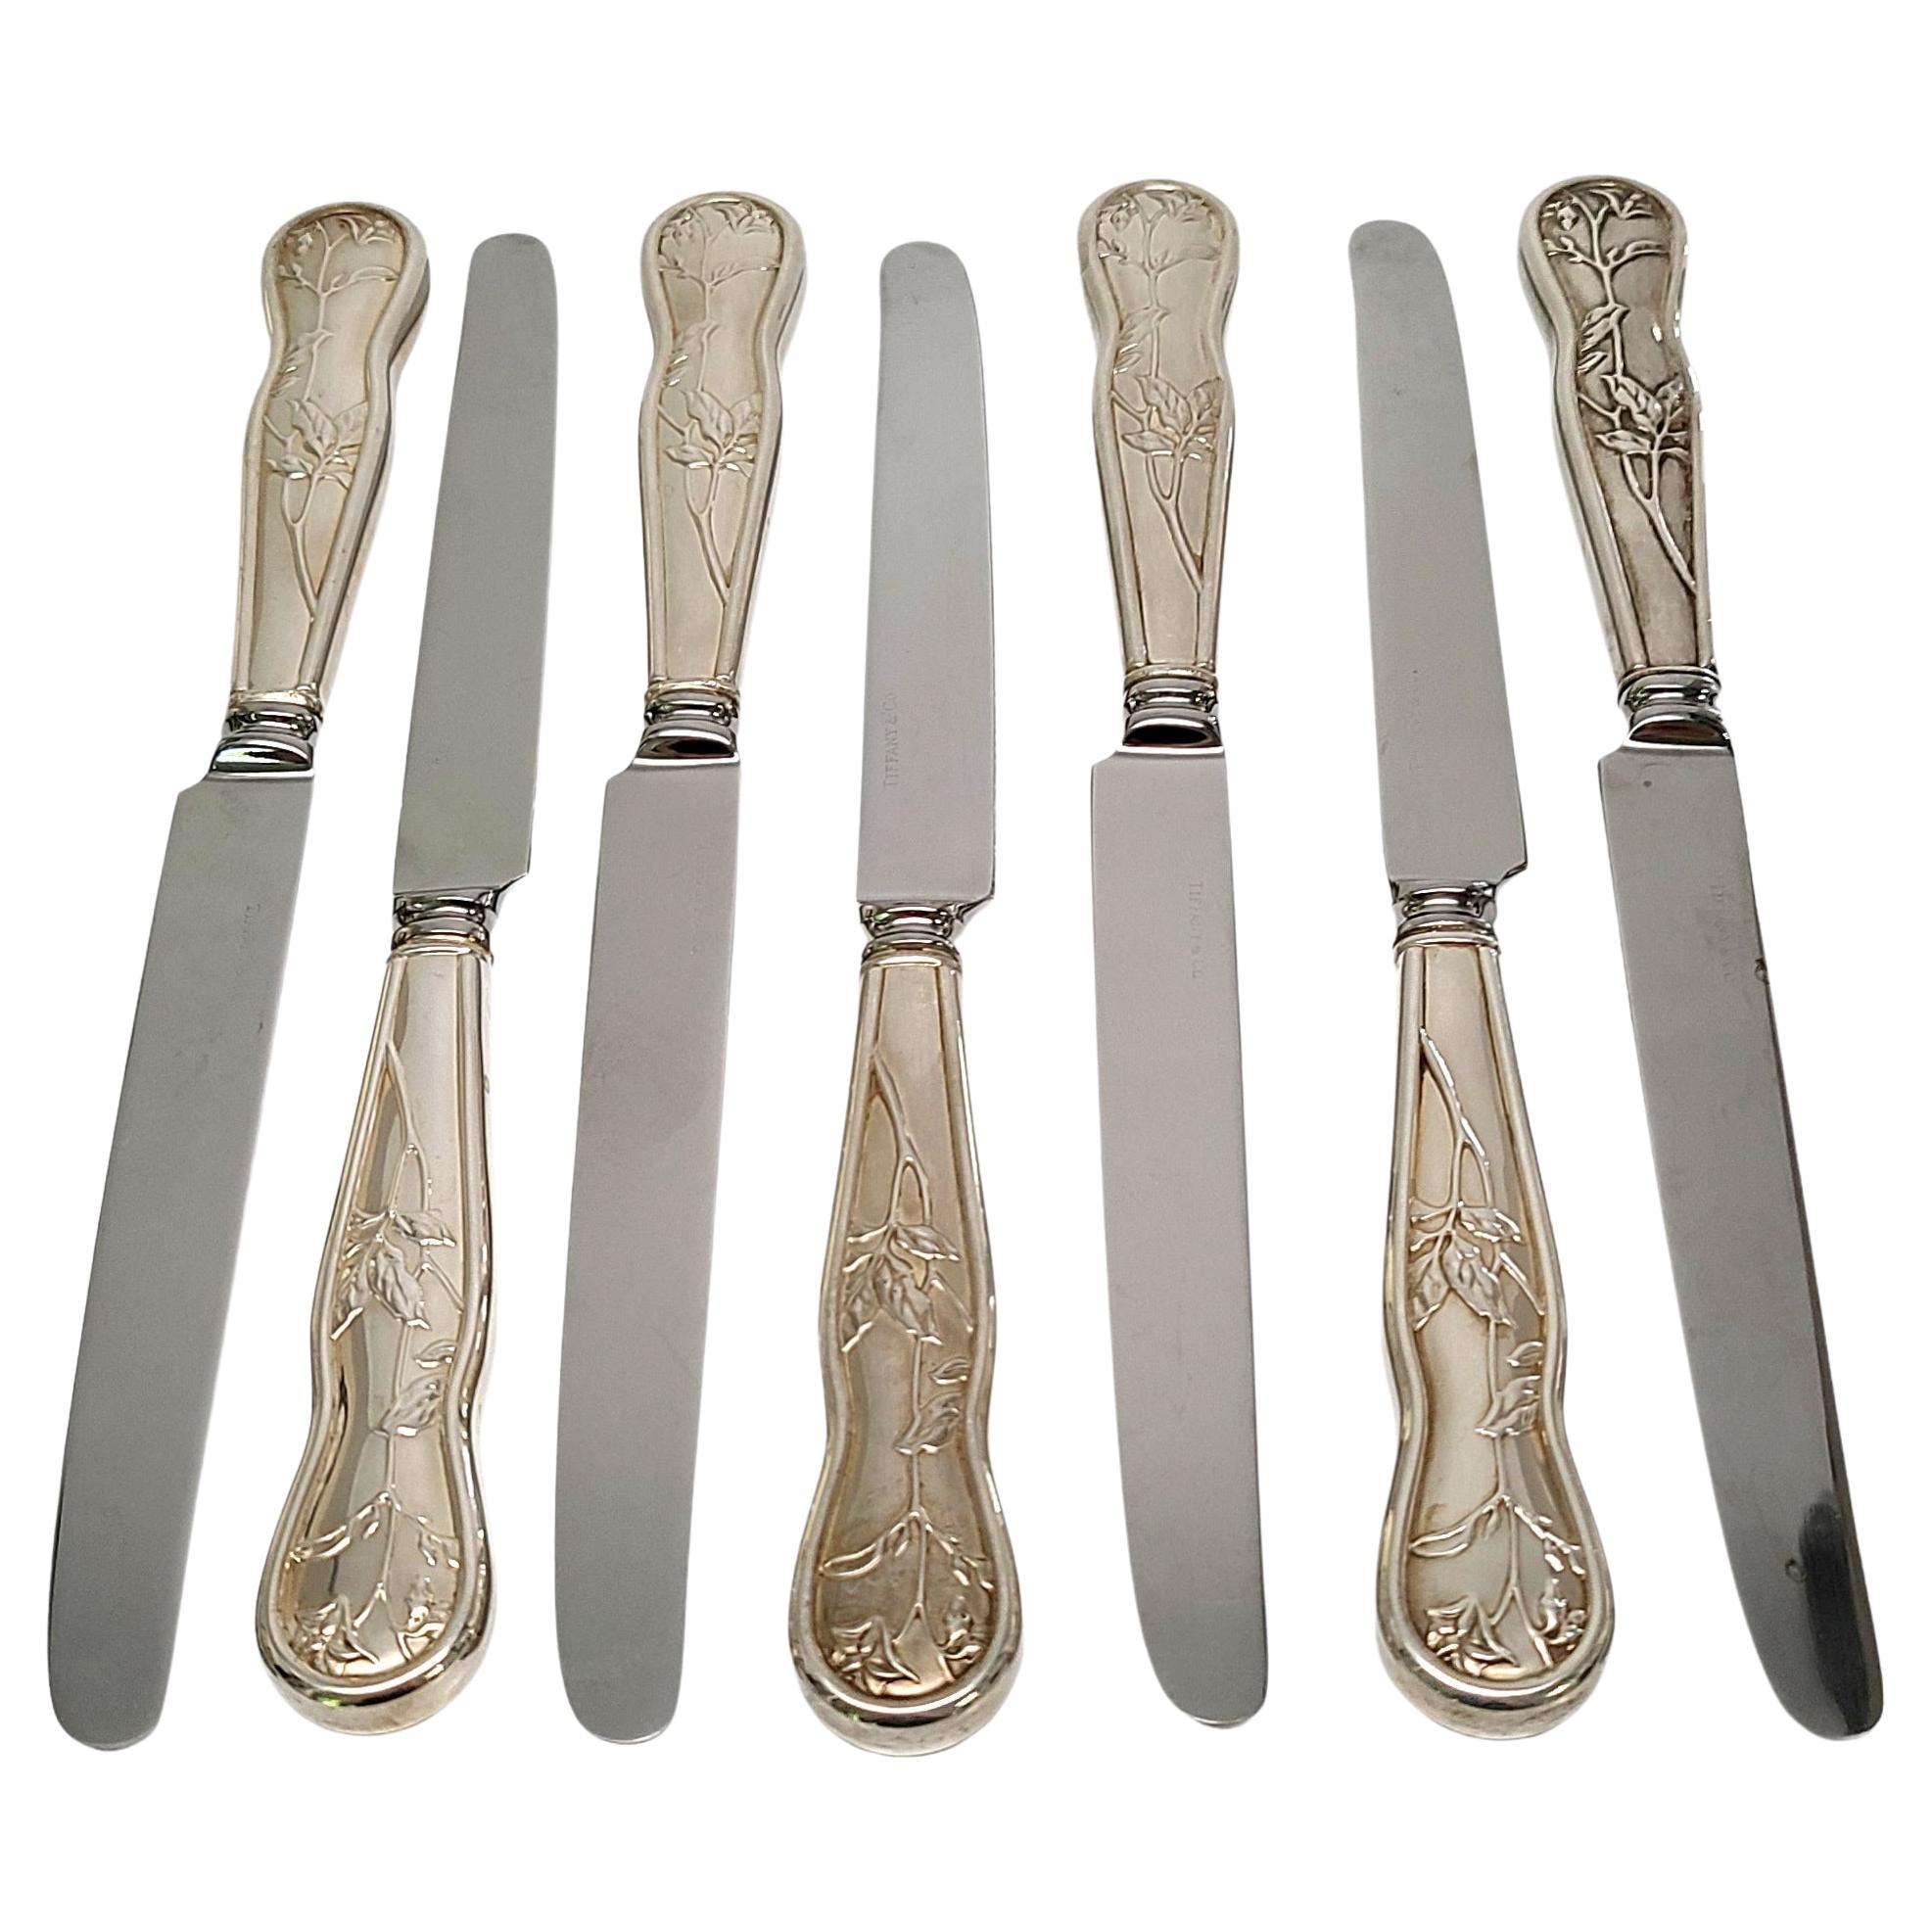 Set of 7 Tiffany & Co American Garden Sterling Silver Handle Dinner Knives